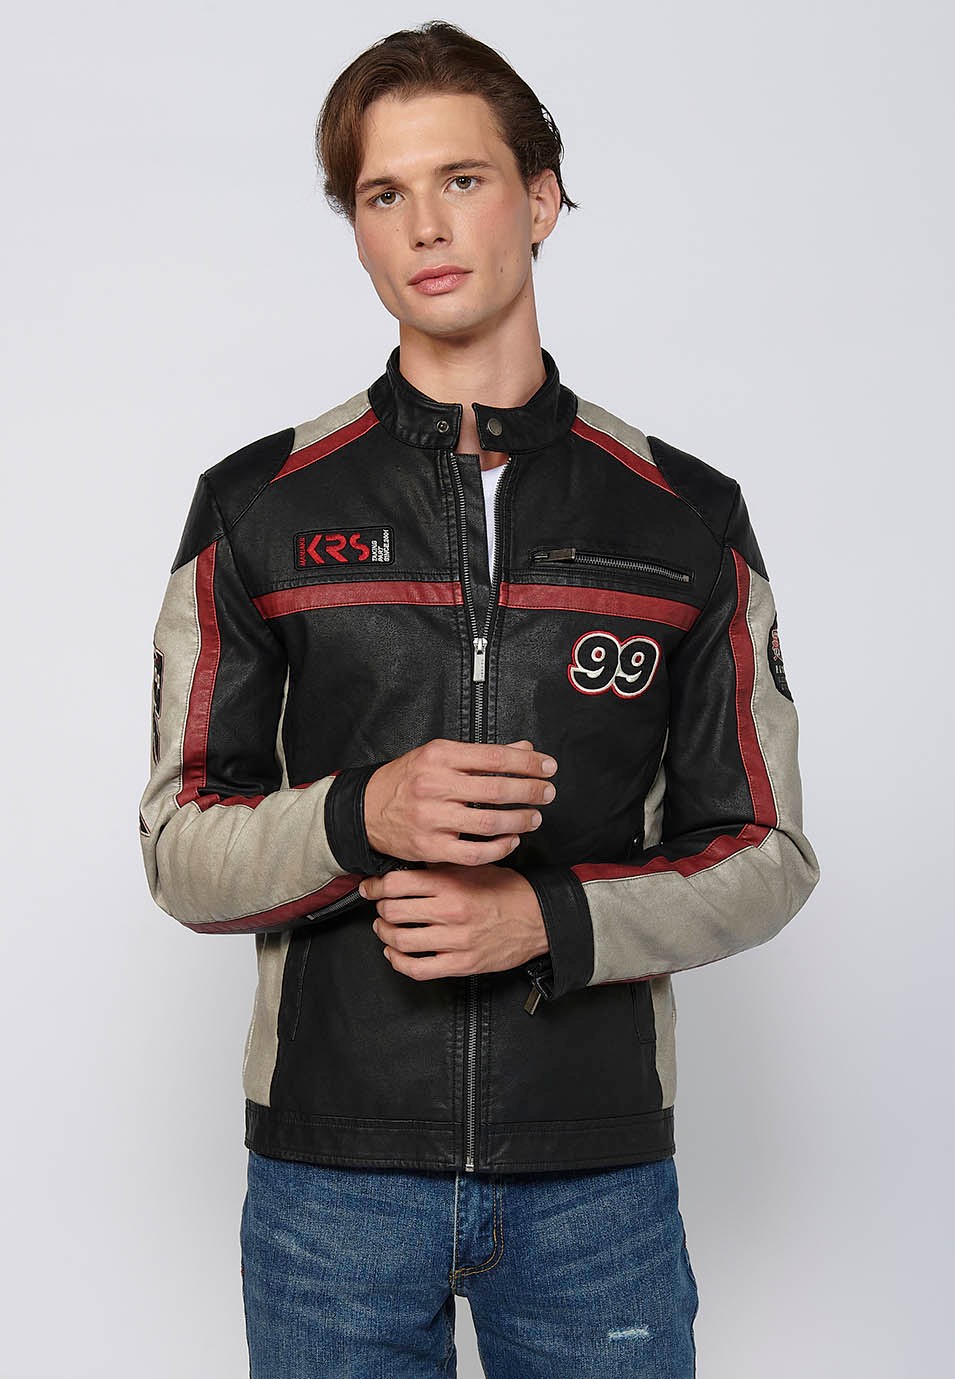 Long-sleeved jacket with round neck and details on the back and sleeves in Black for Men